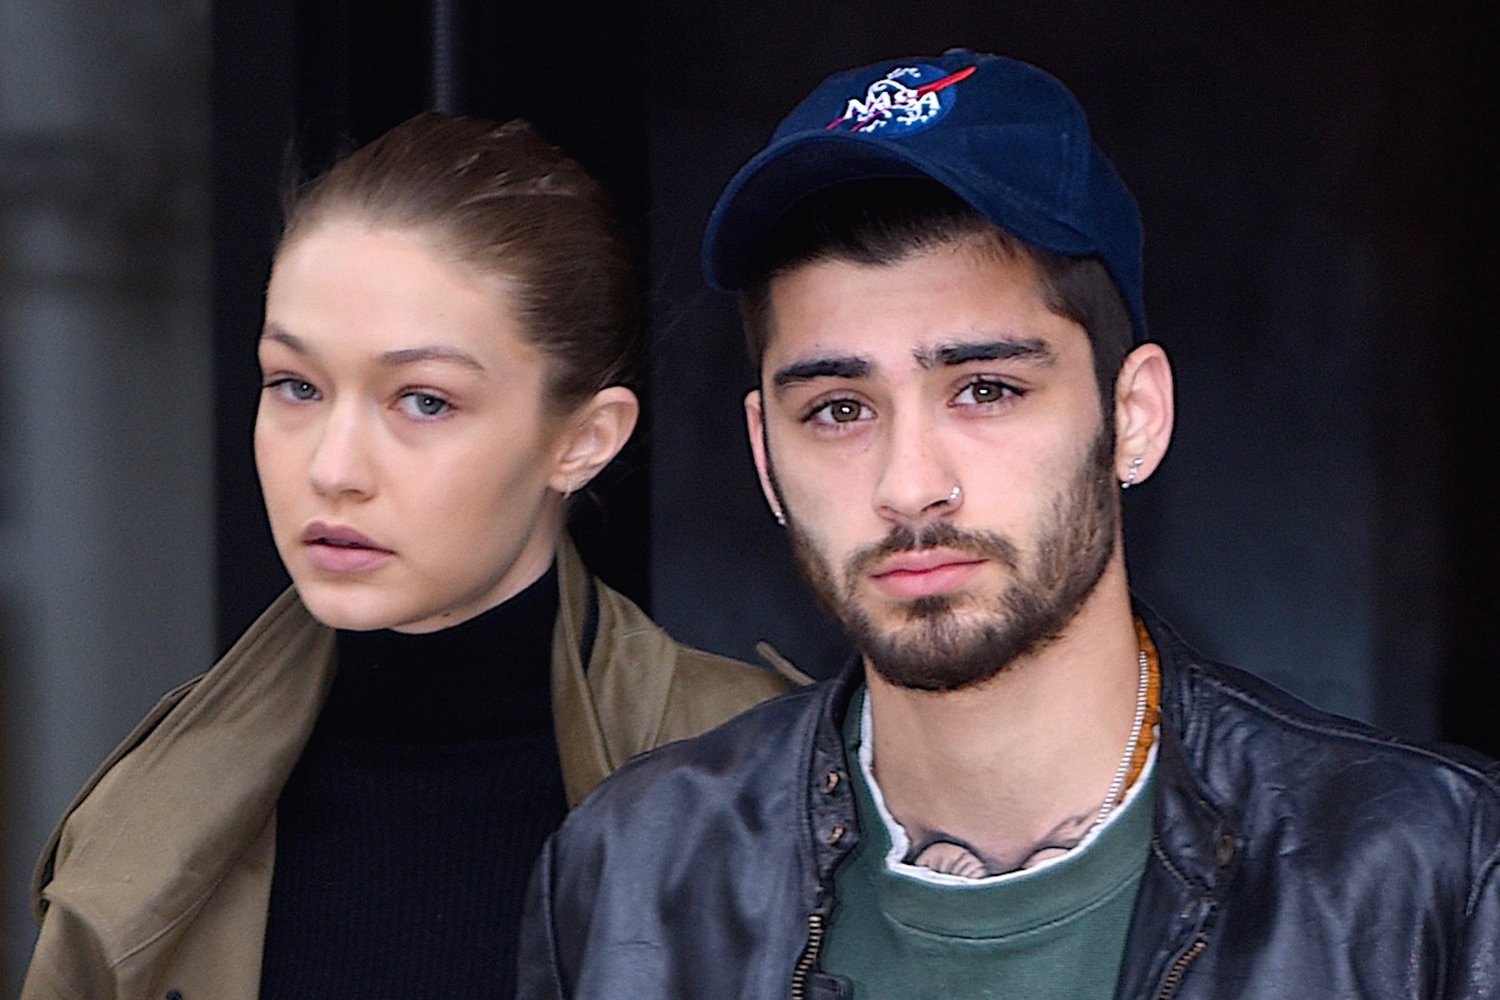 Gigi Hadid Shares First Instagram Post After Zayn Malik Breakup and Alleged Physical Altercation With Mother